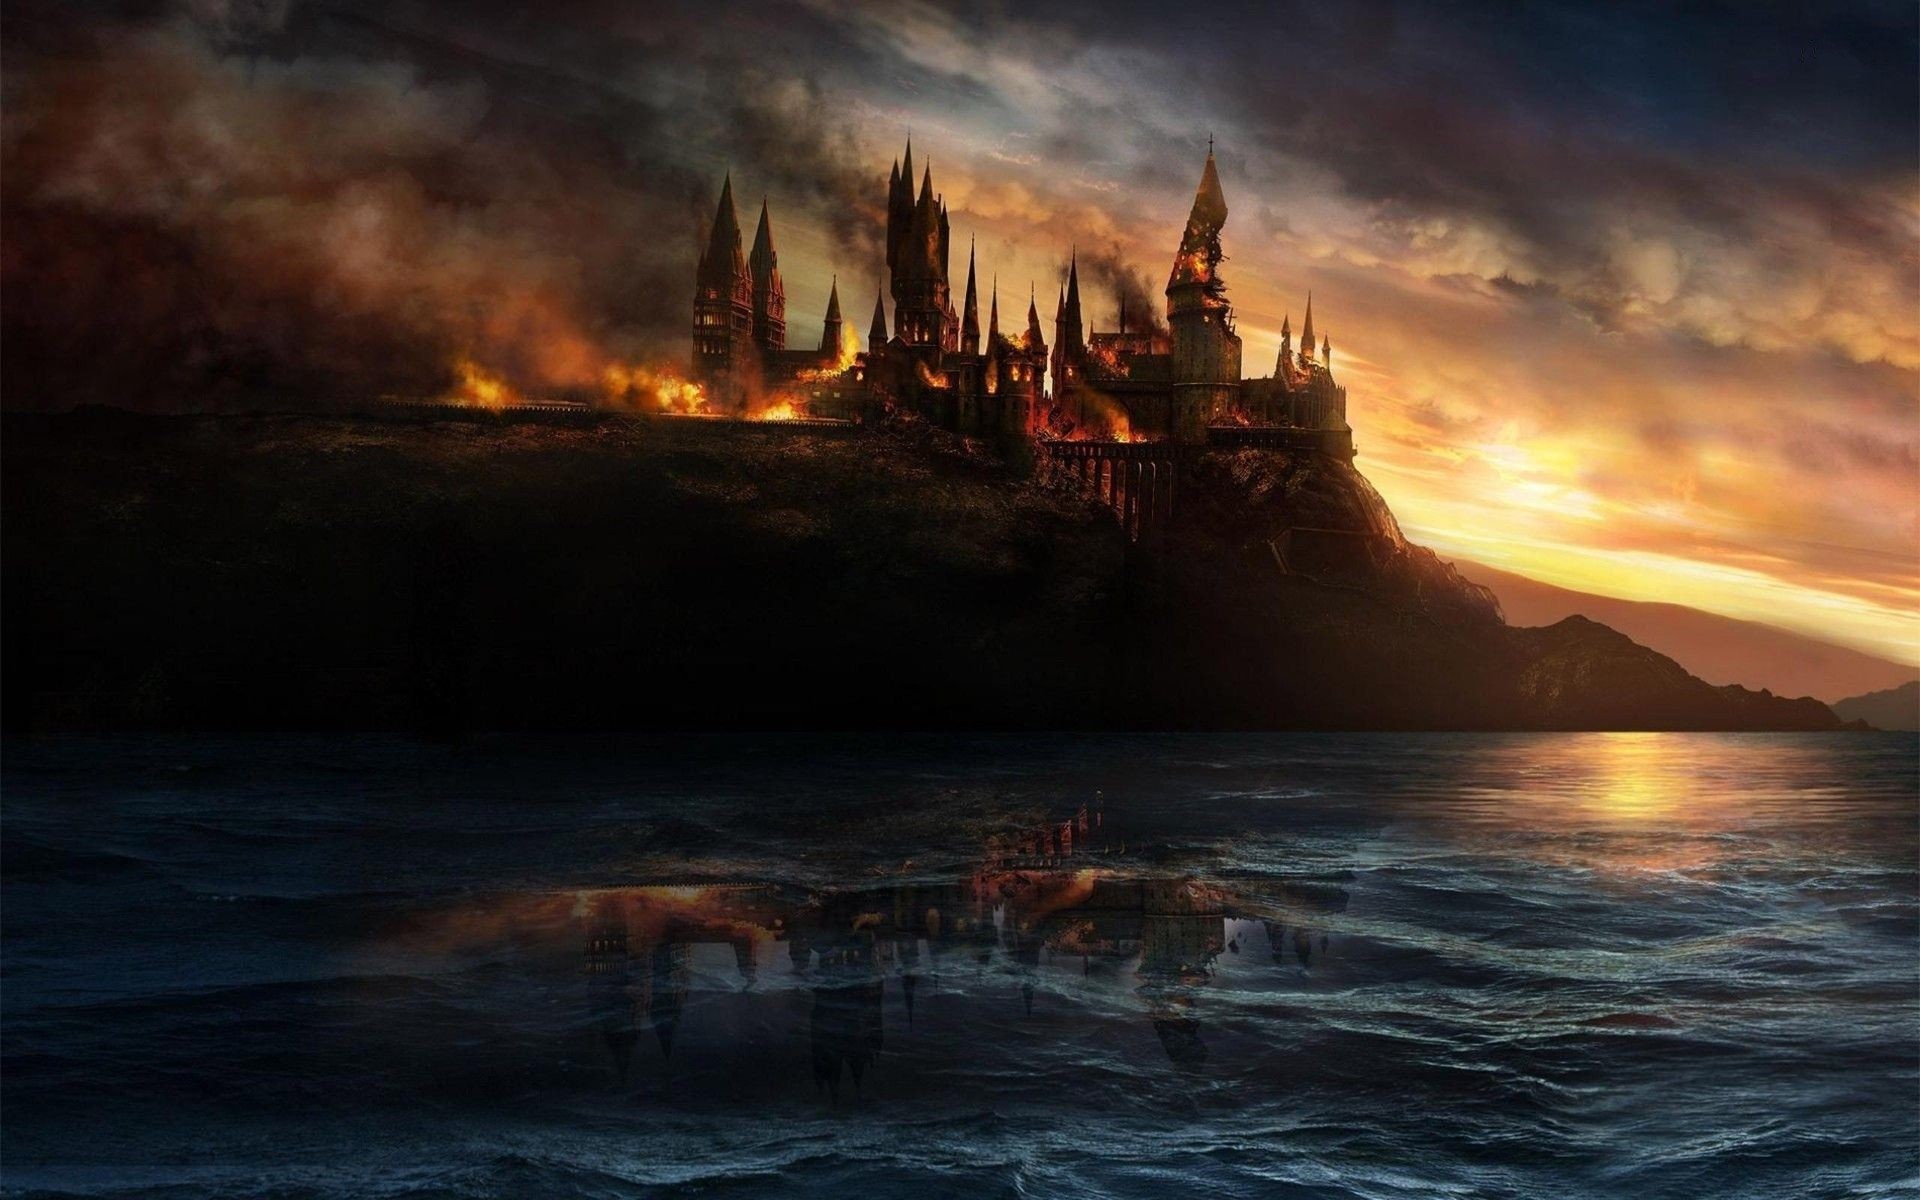 1920x1200 hd hogwarts castle wallpapers hd desktop wallpapers amazing images windows  wallpapers download free images desktop backgrounds high quality dual  monitors ...